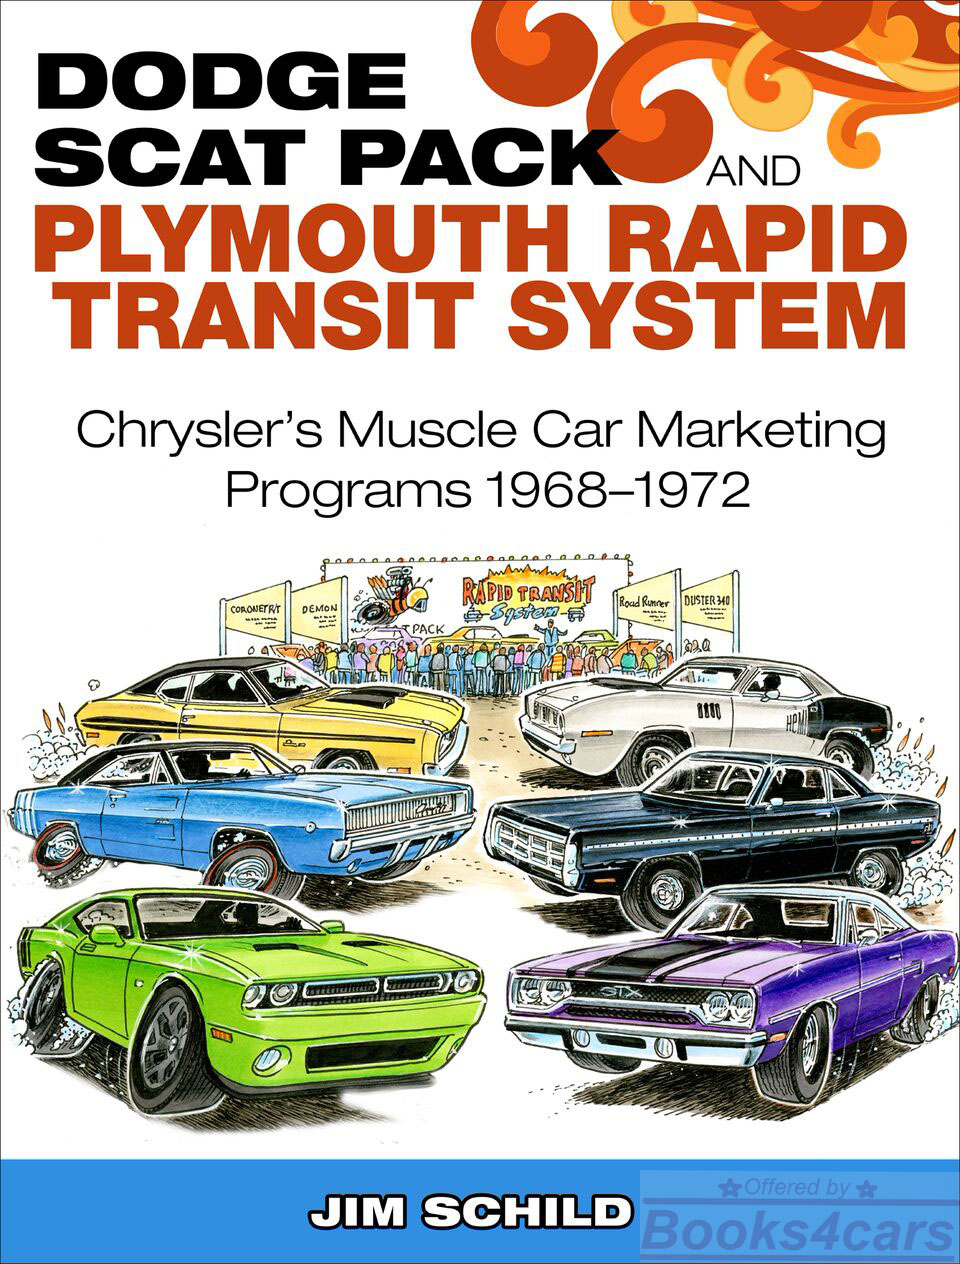 1968-1972 Dodge Scat Pack and Plymouth Rapid Transit System: Chrysler's Muscle Car Marketing Programs by J Schild 192pgs